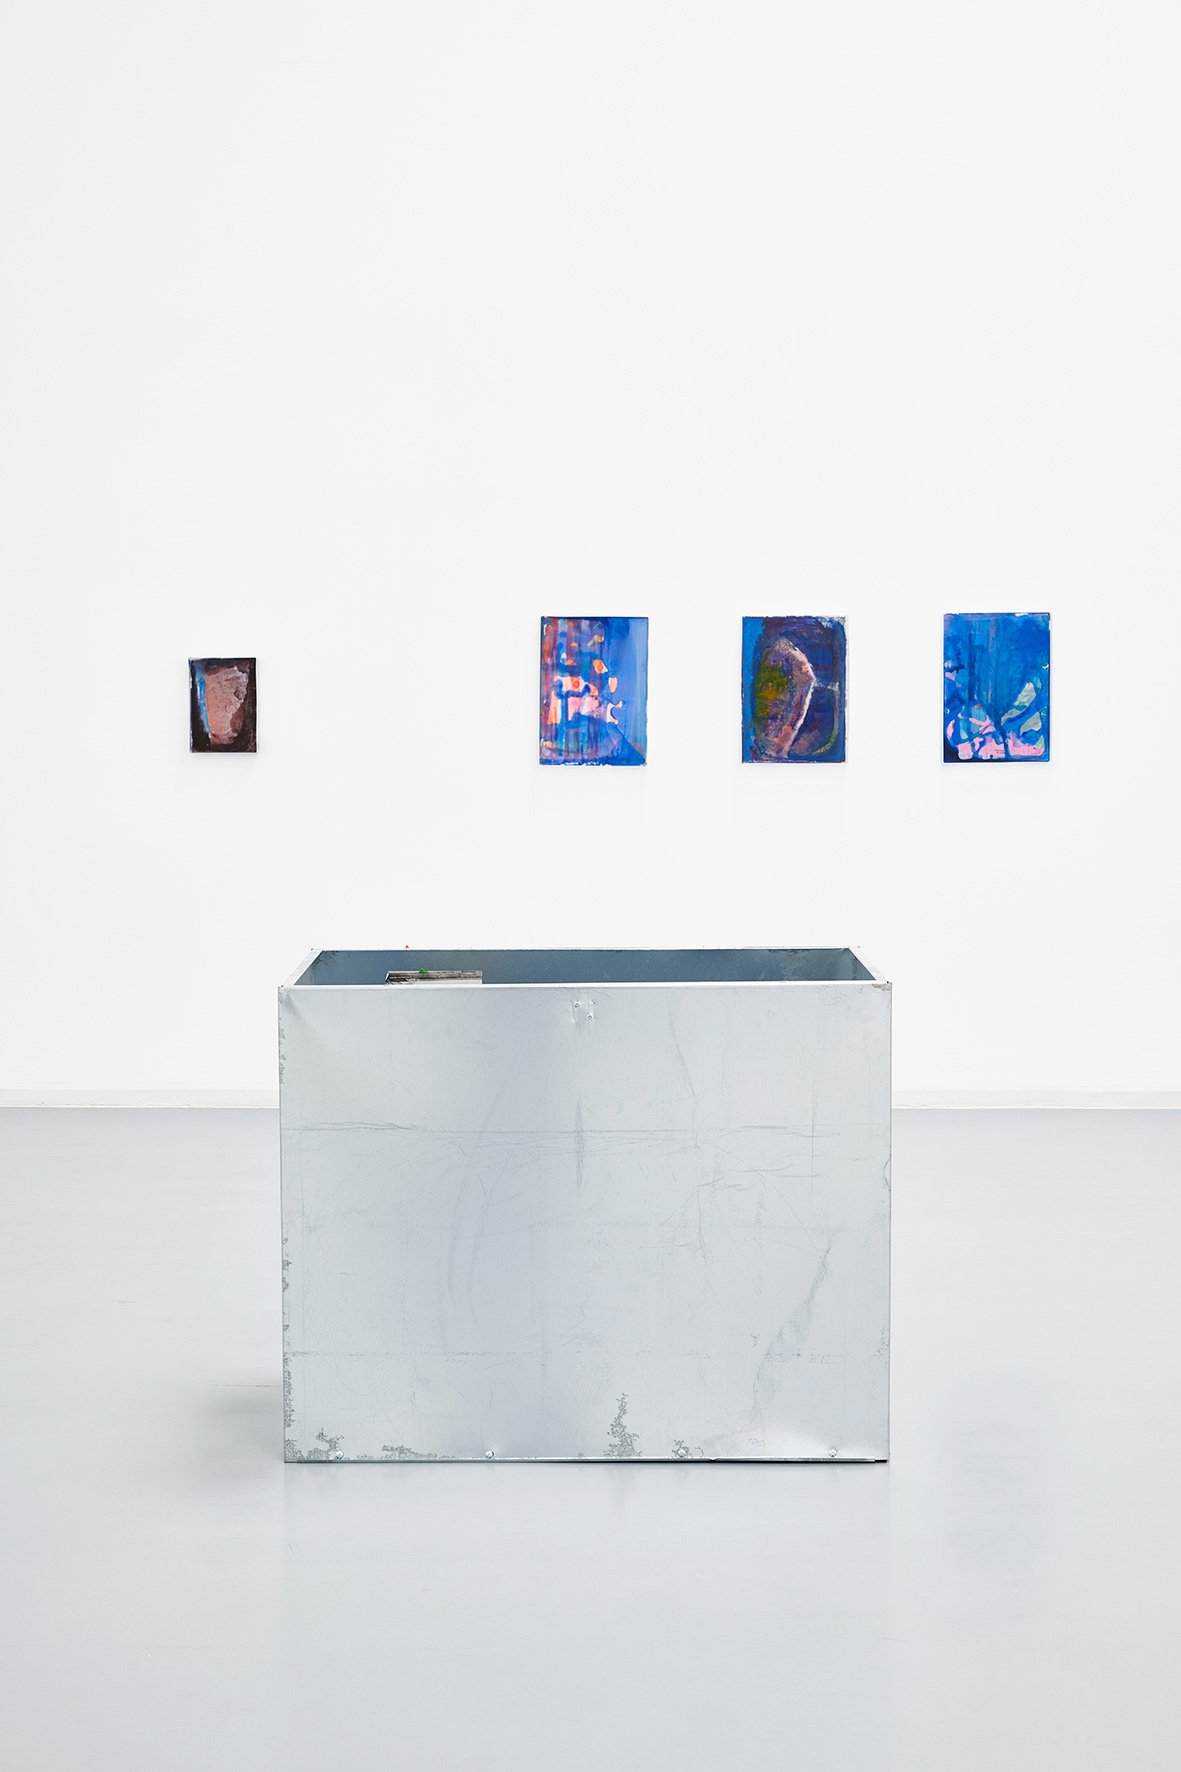 Hayley Tomkins: Stick crystals to paintings, Exhibition view, Bonner Kunstverein, 2018. Photo: Mareike Tocha